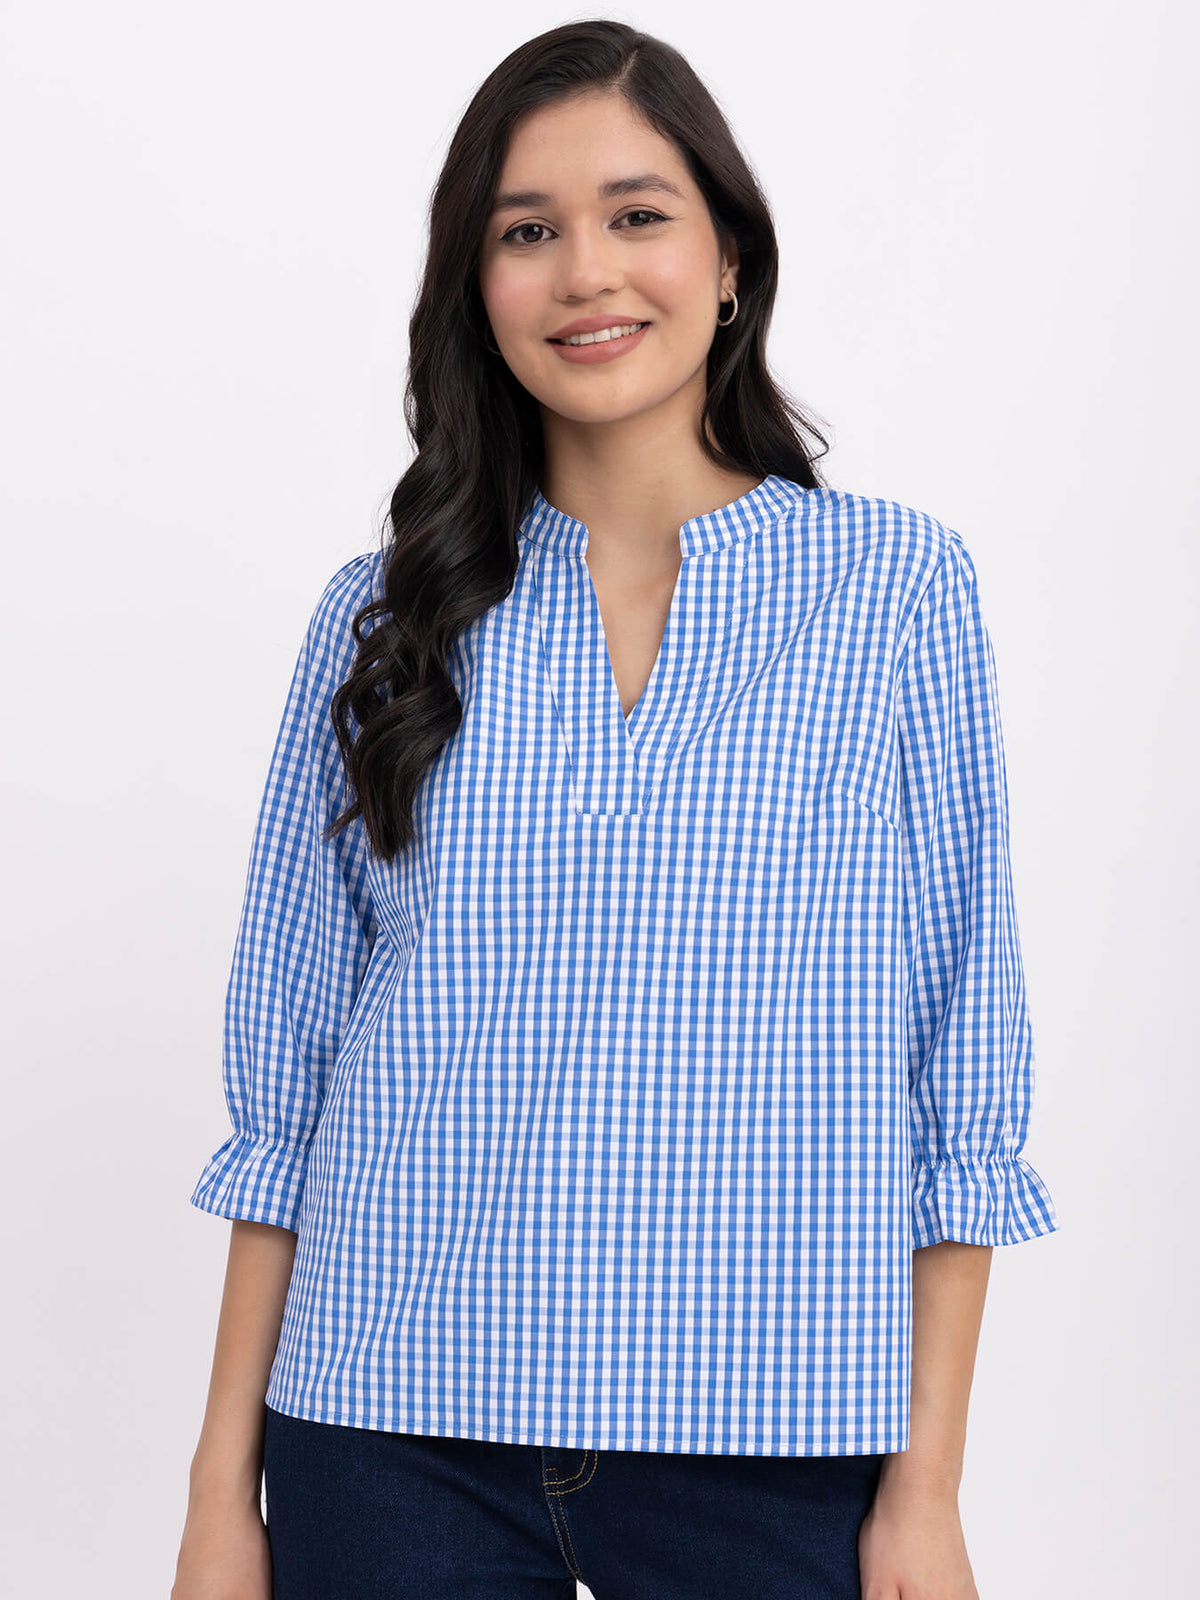 Cotton Checkered Top - Blue And White